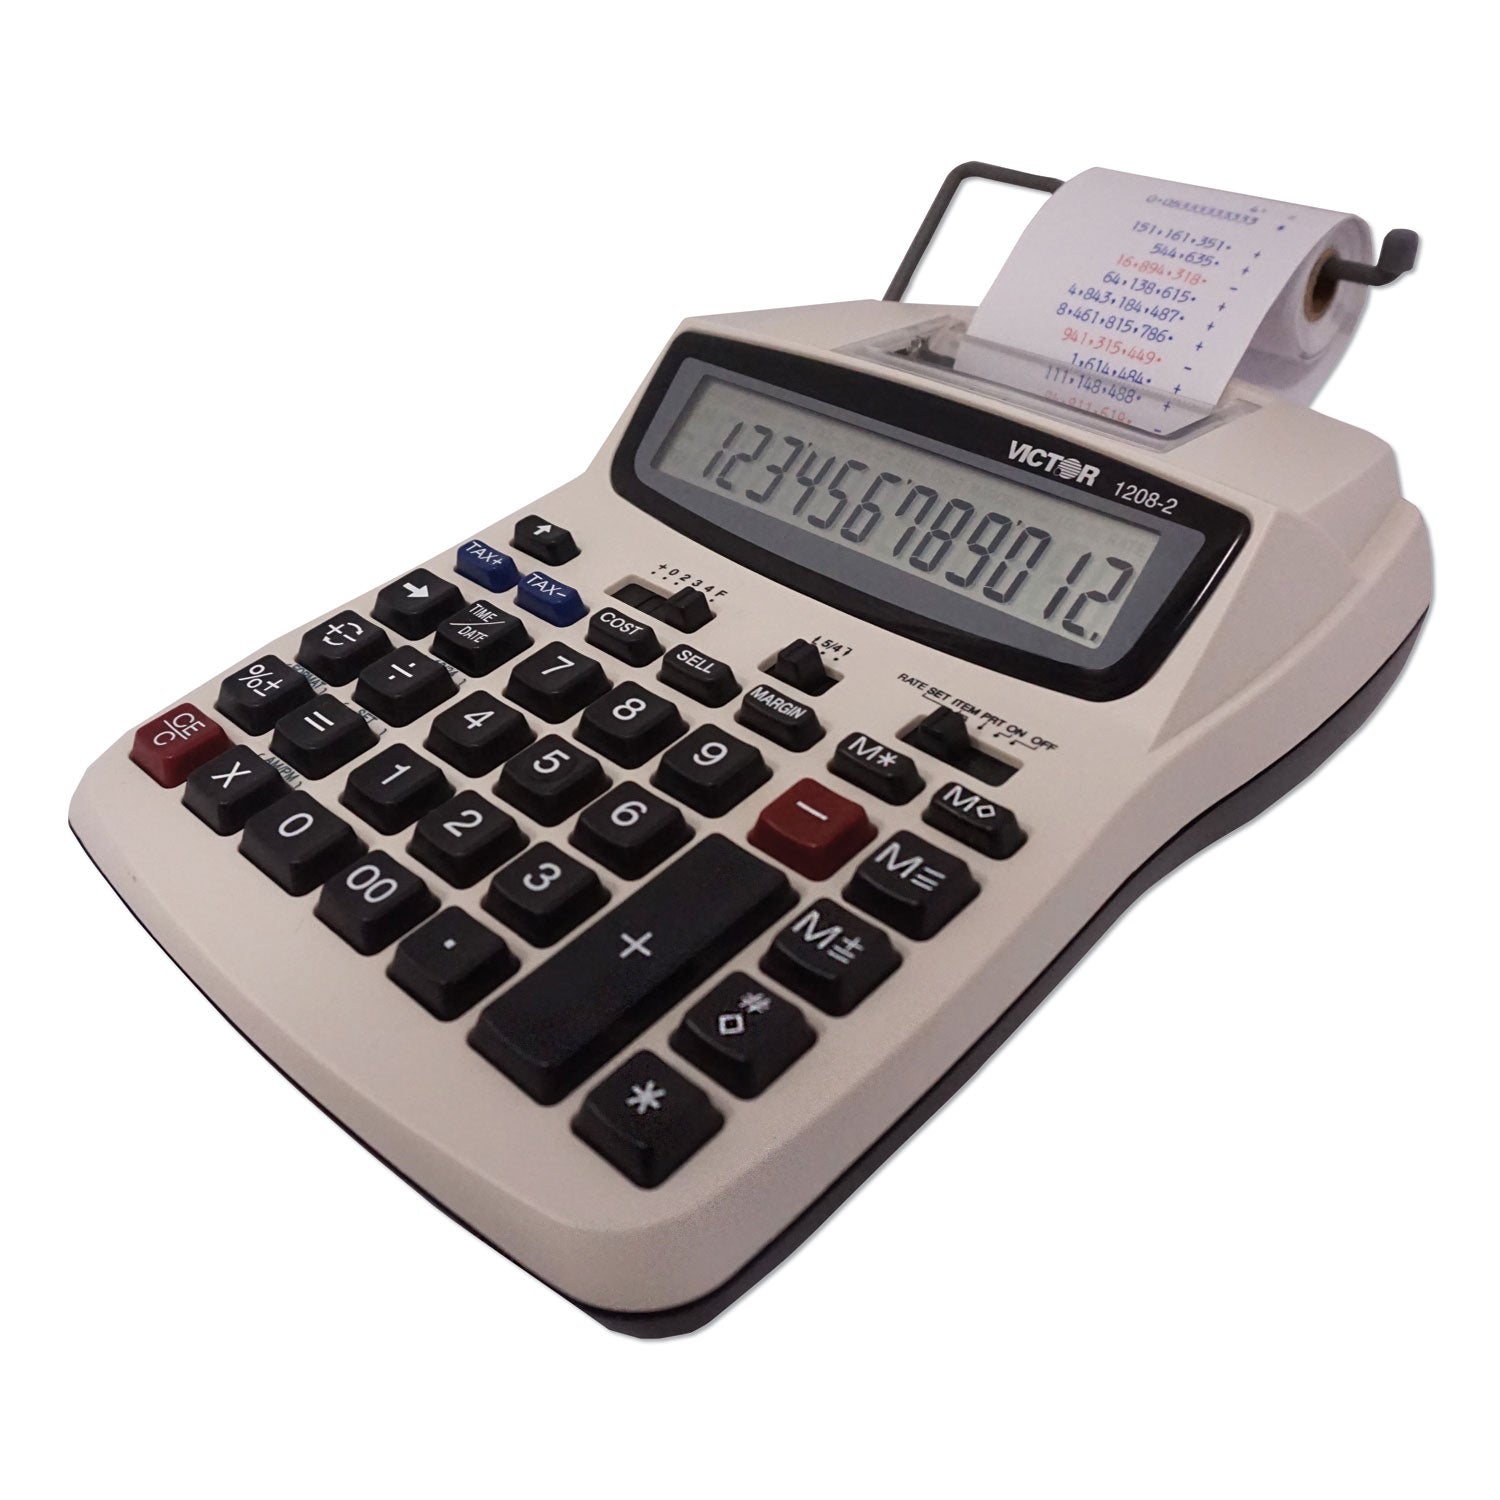 1208-2 Two-Color Compact Printing Calculator, Black/Red Print, 2.3 Lines/Sec - 